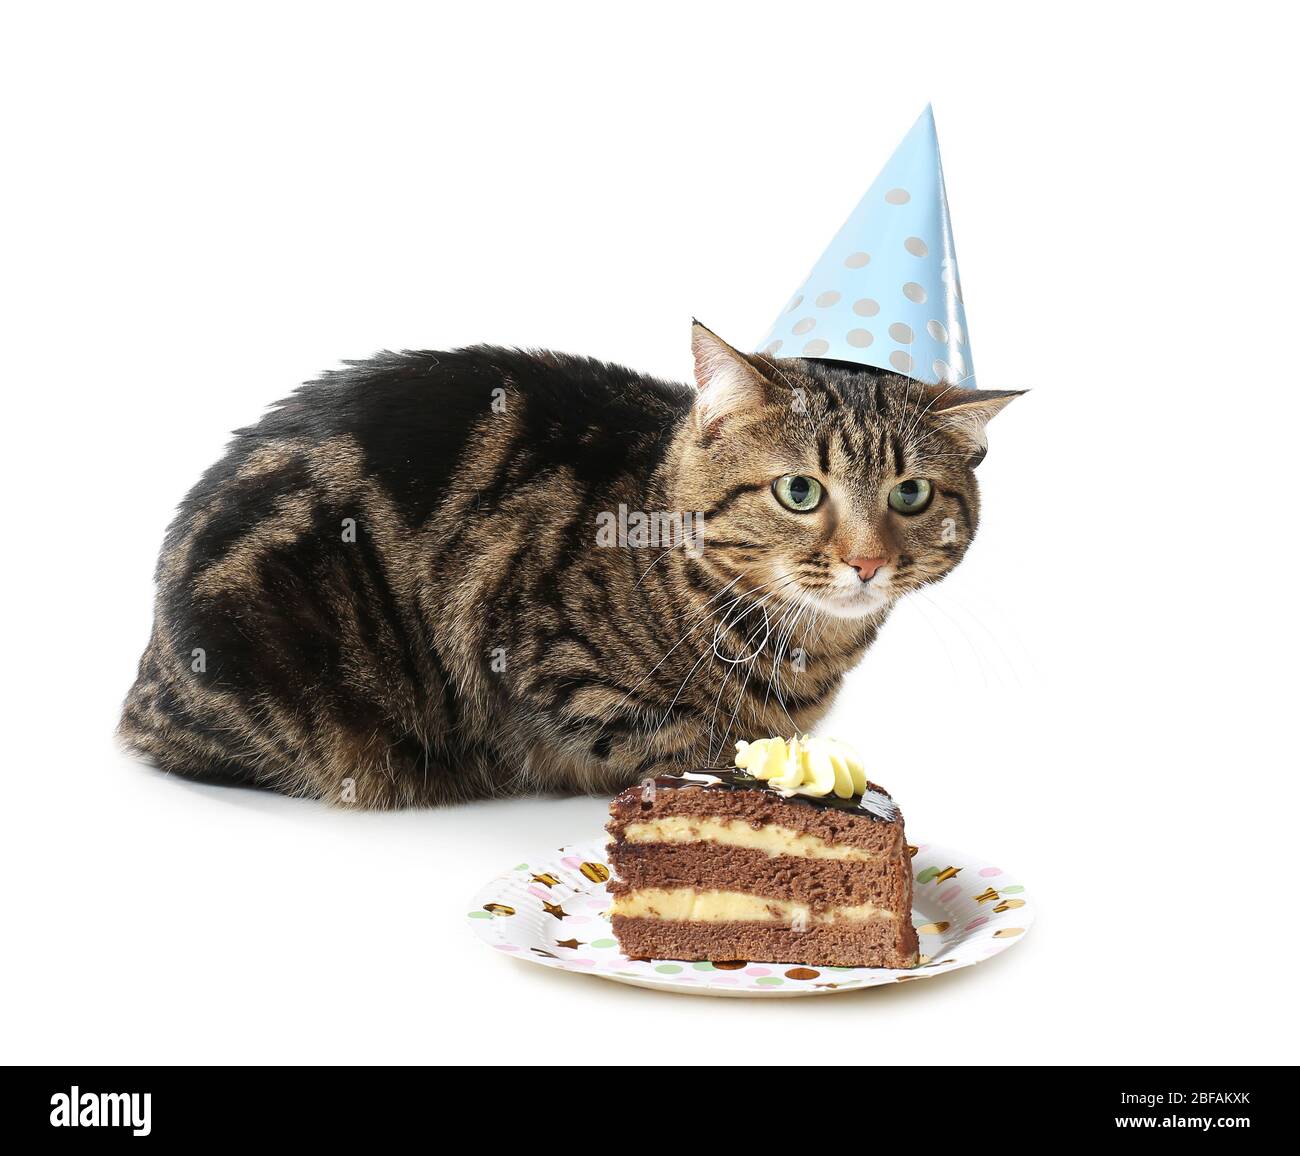 Cute cat in party hat and with Birthday cake on white background Stock Photo